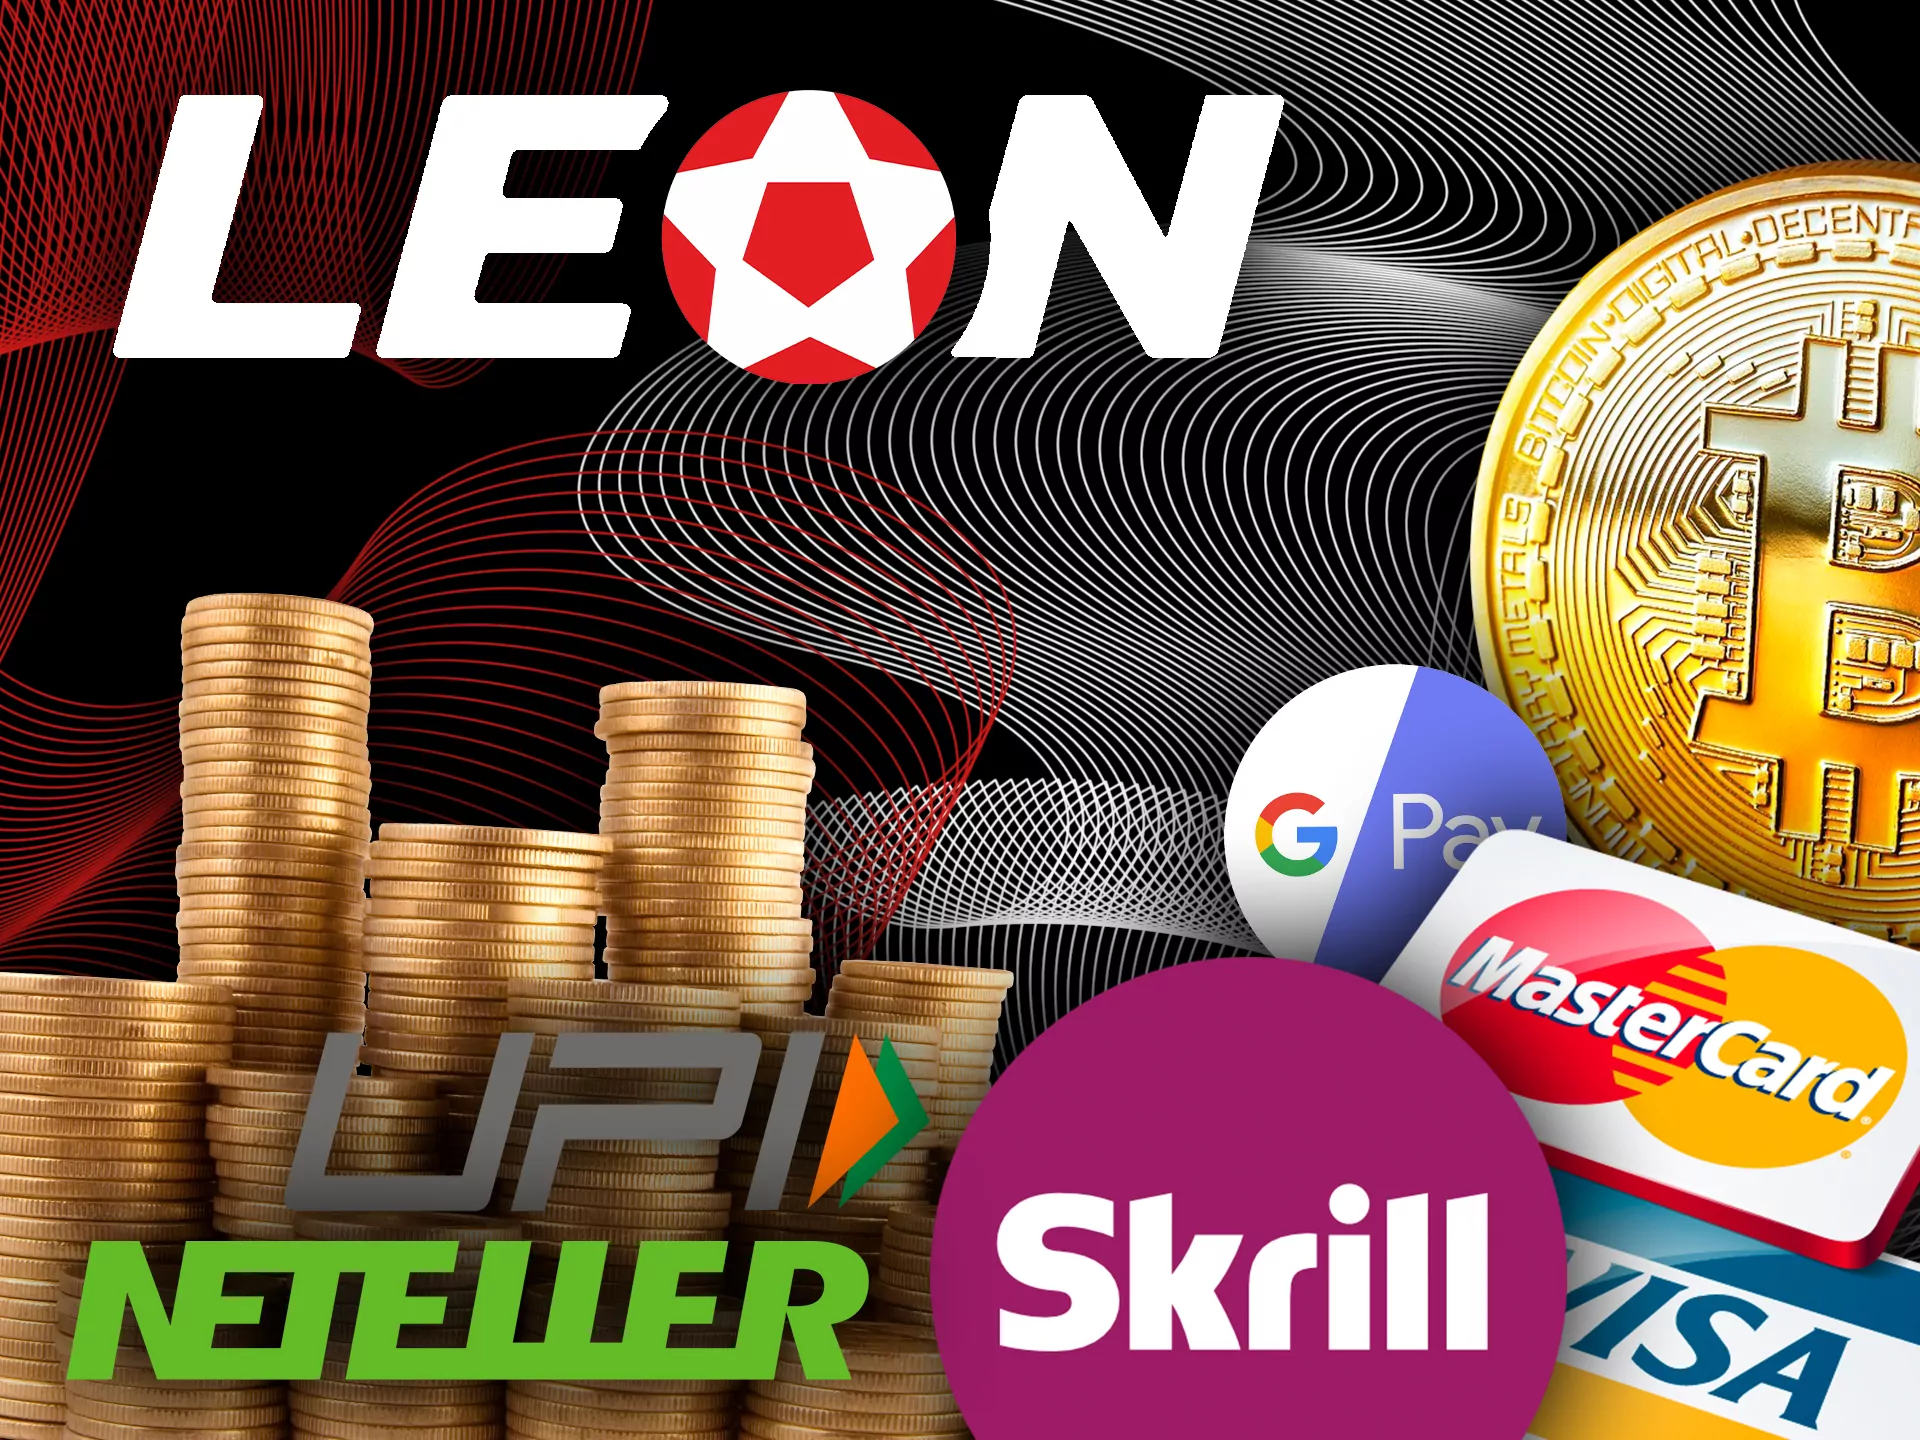 Leon has the most well-known and convenient payment systems to deposit and withdraw money.